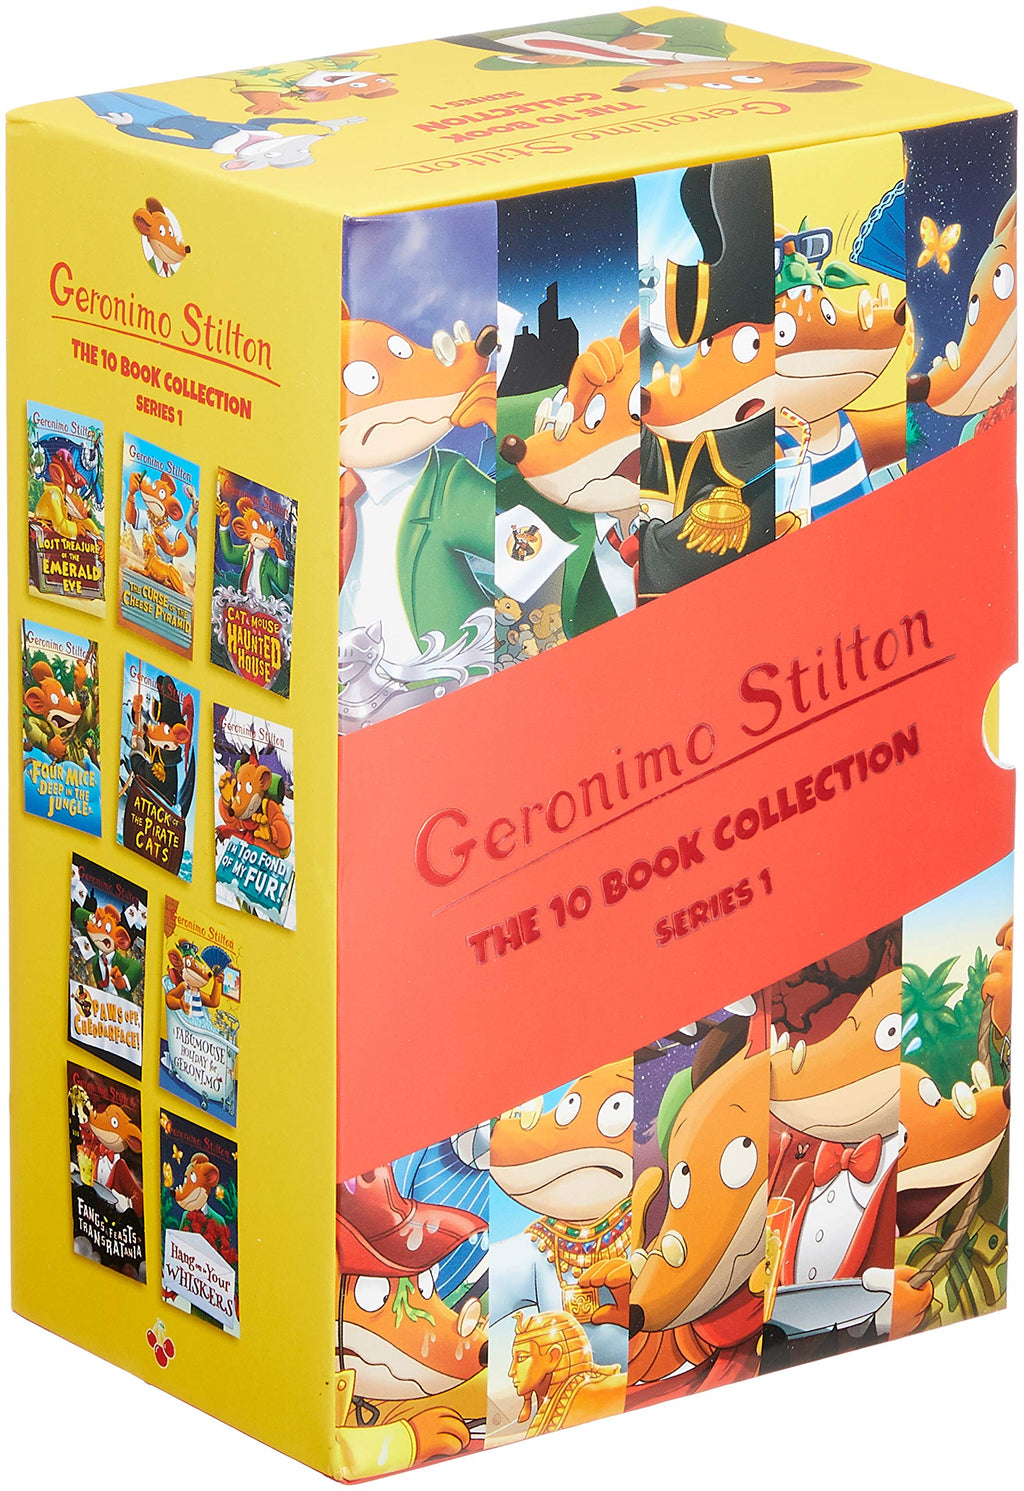 Geronimo Stilton The 10 Book Collection (Series 2) Box Set - Ages 5-7 -  Paperback